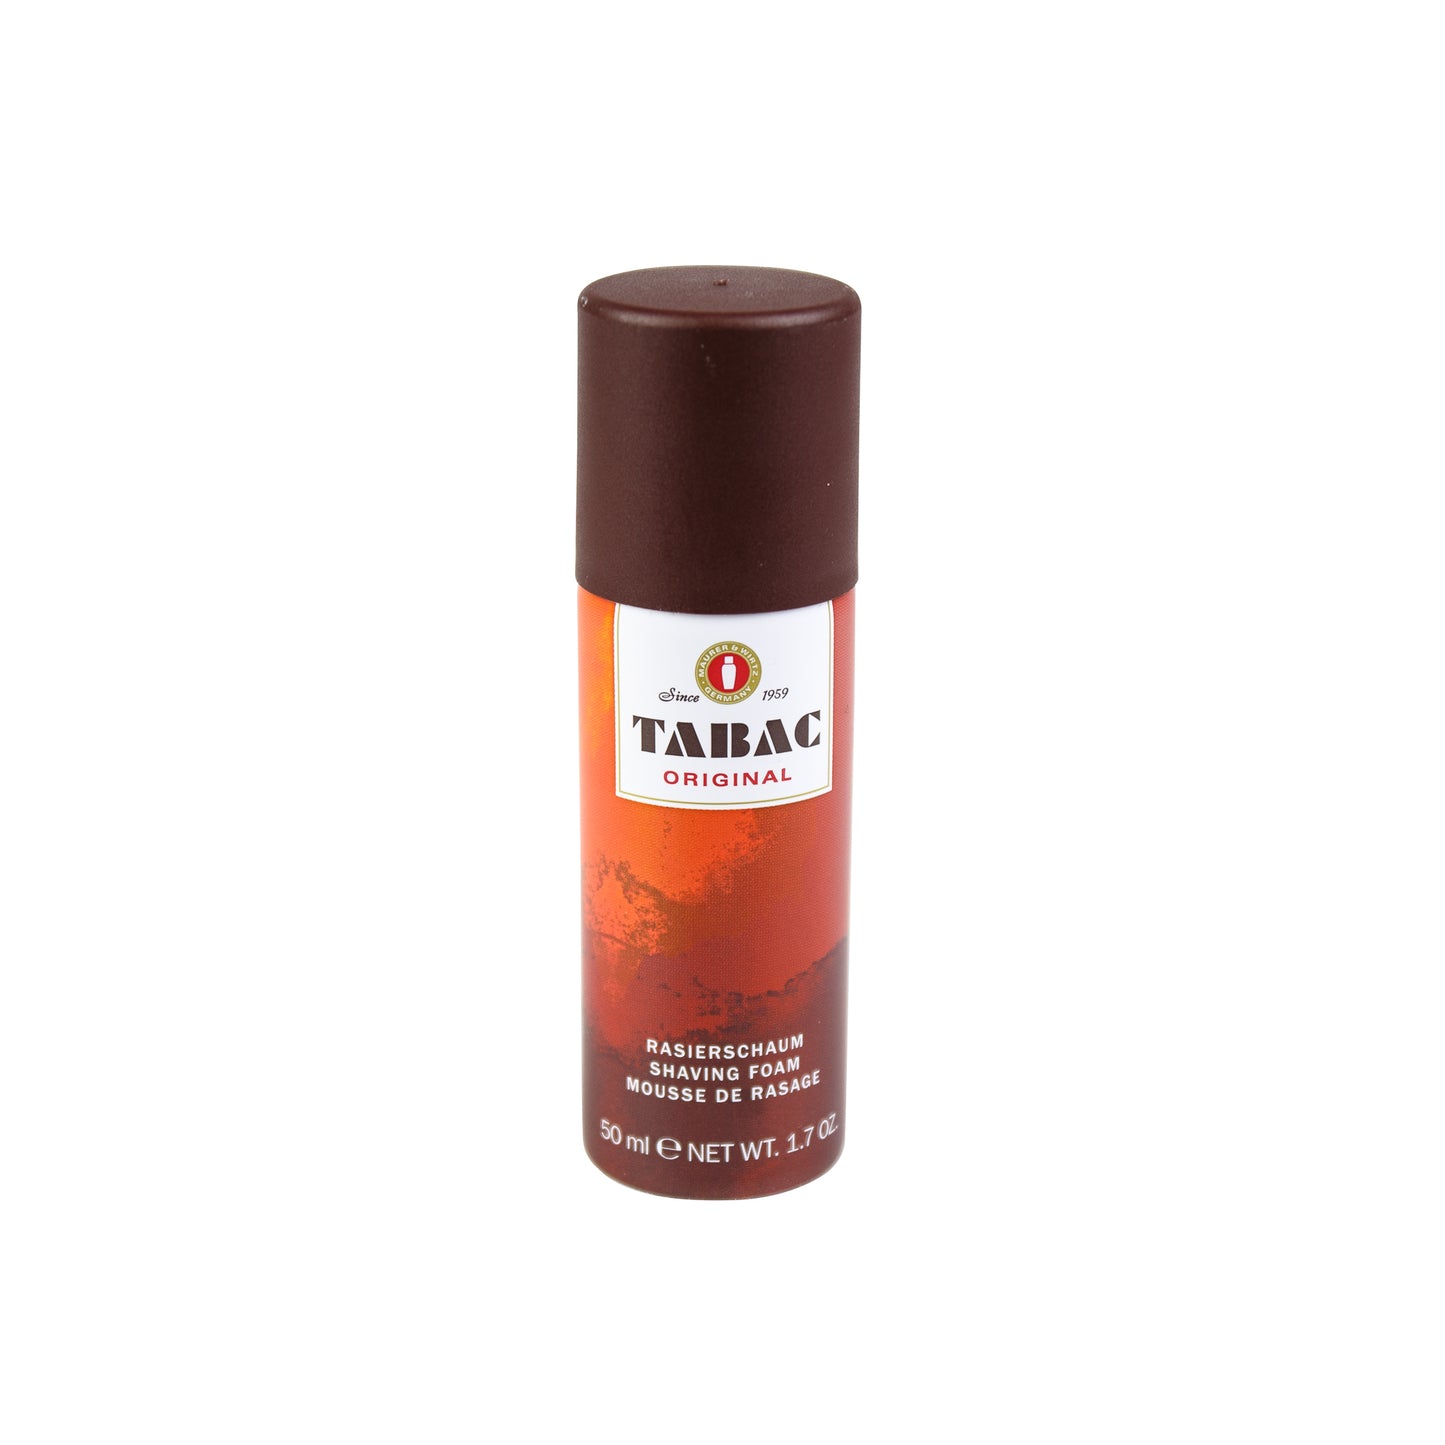 Primary image of Tabac Travel Shave Cream